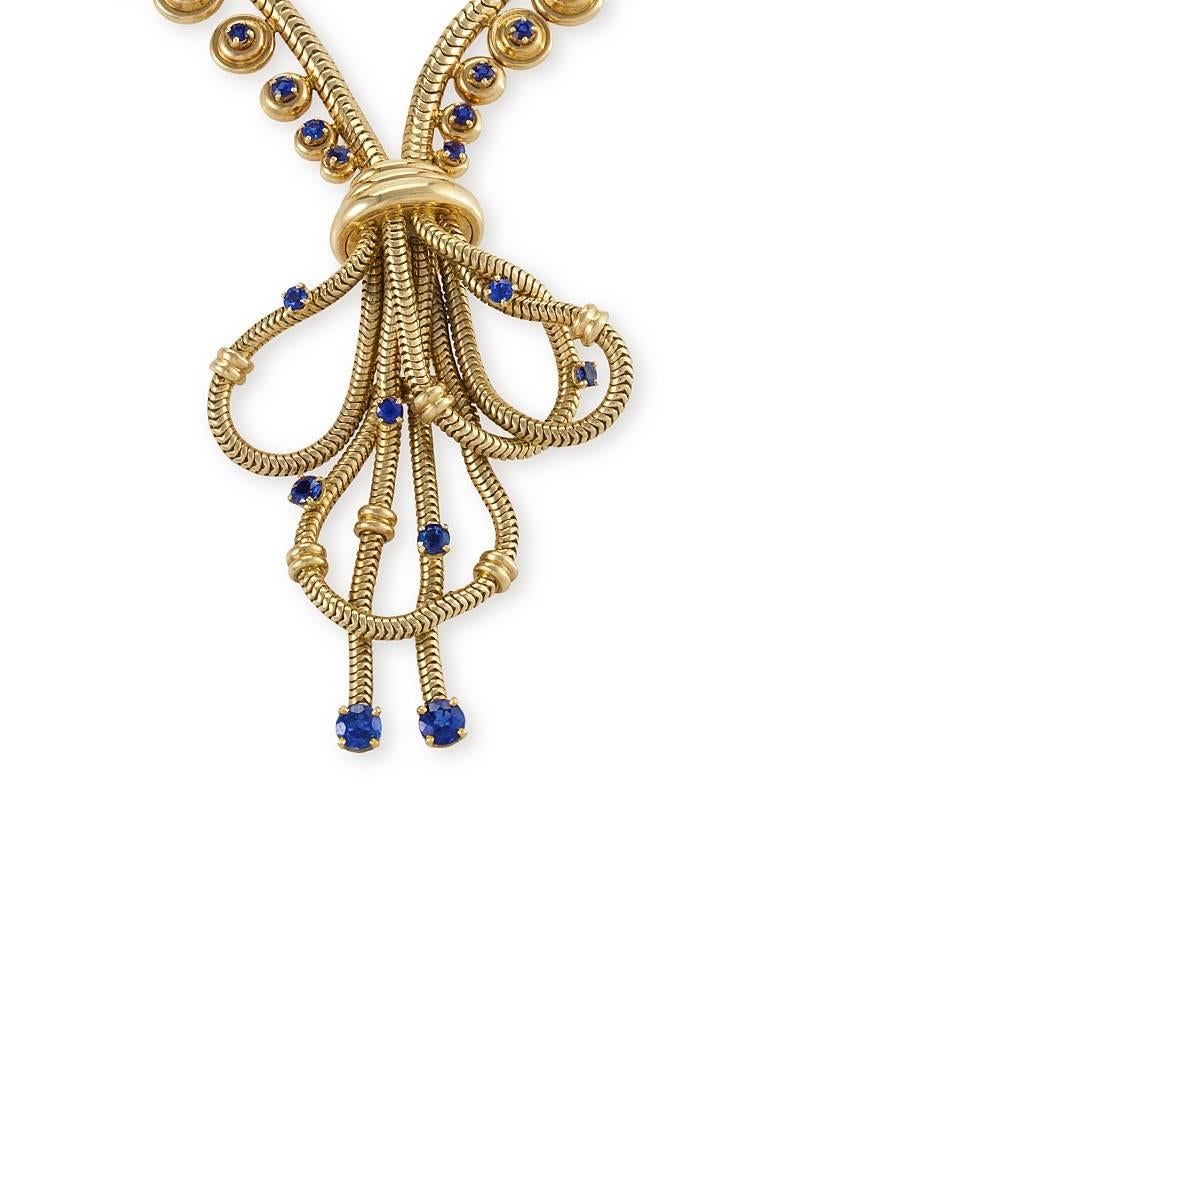 A French Retro 18 karat gold necklace with sapphires by Boucheron. The necklace has 57 round-cut sapphires with an approximate total weight of 2.25 carats. The necklace is designed in a modified zipper motif of snake chain and round-set sapphires